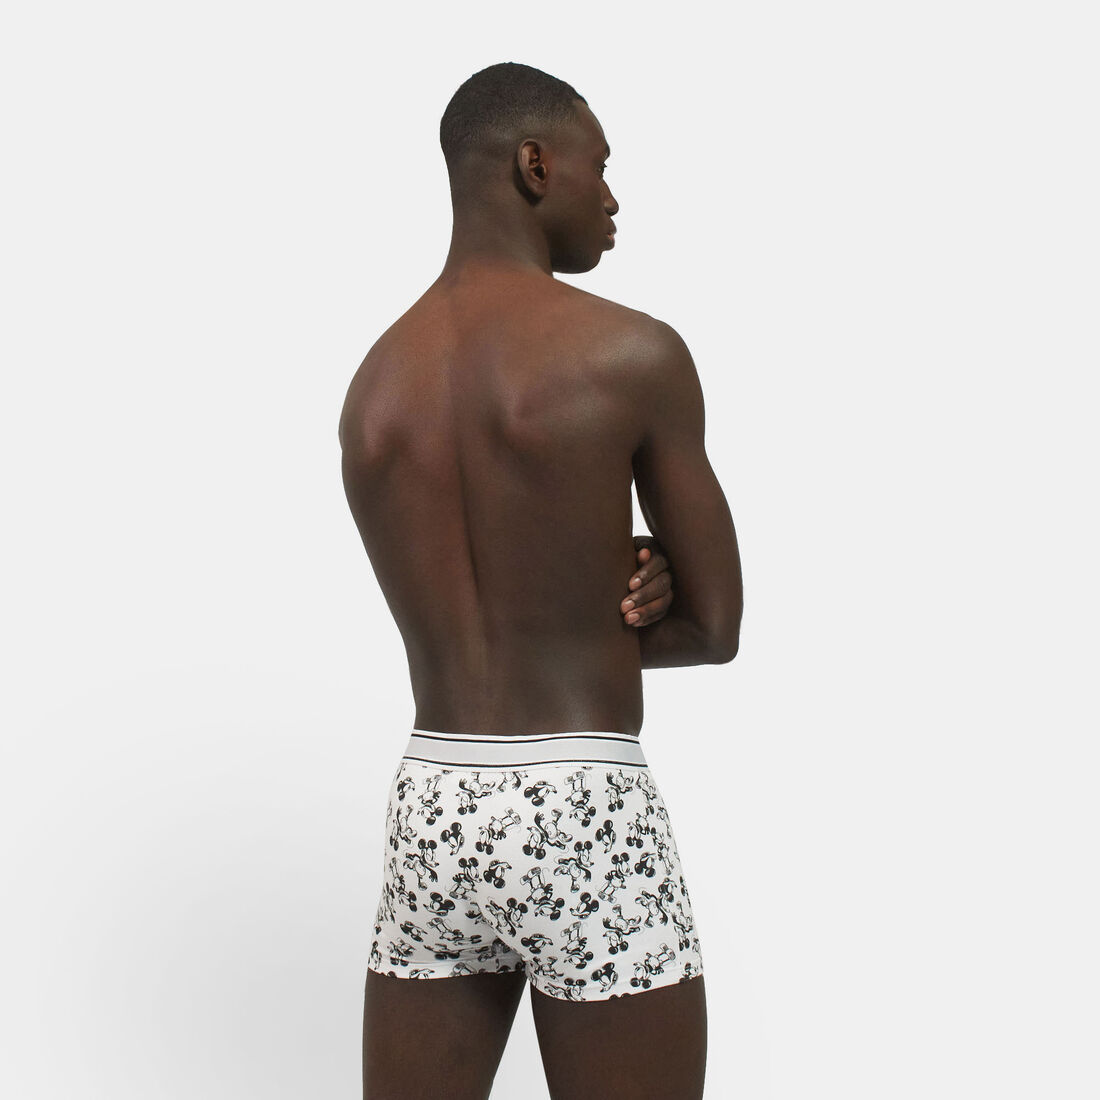 Mickey patterned boxer shorts;